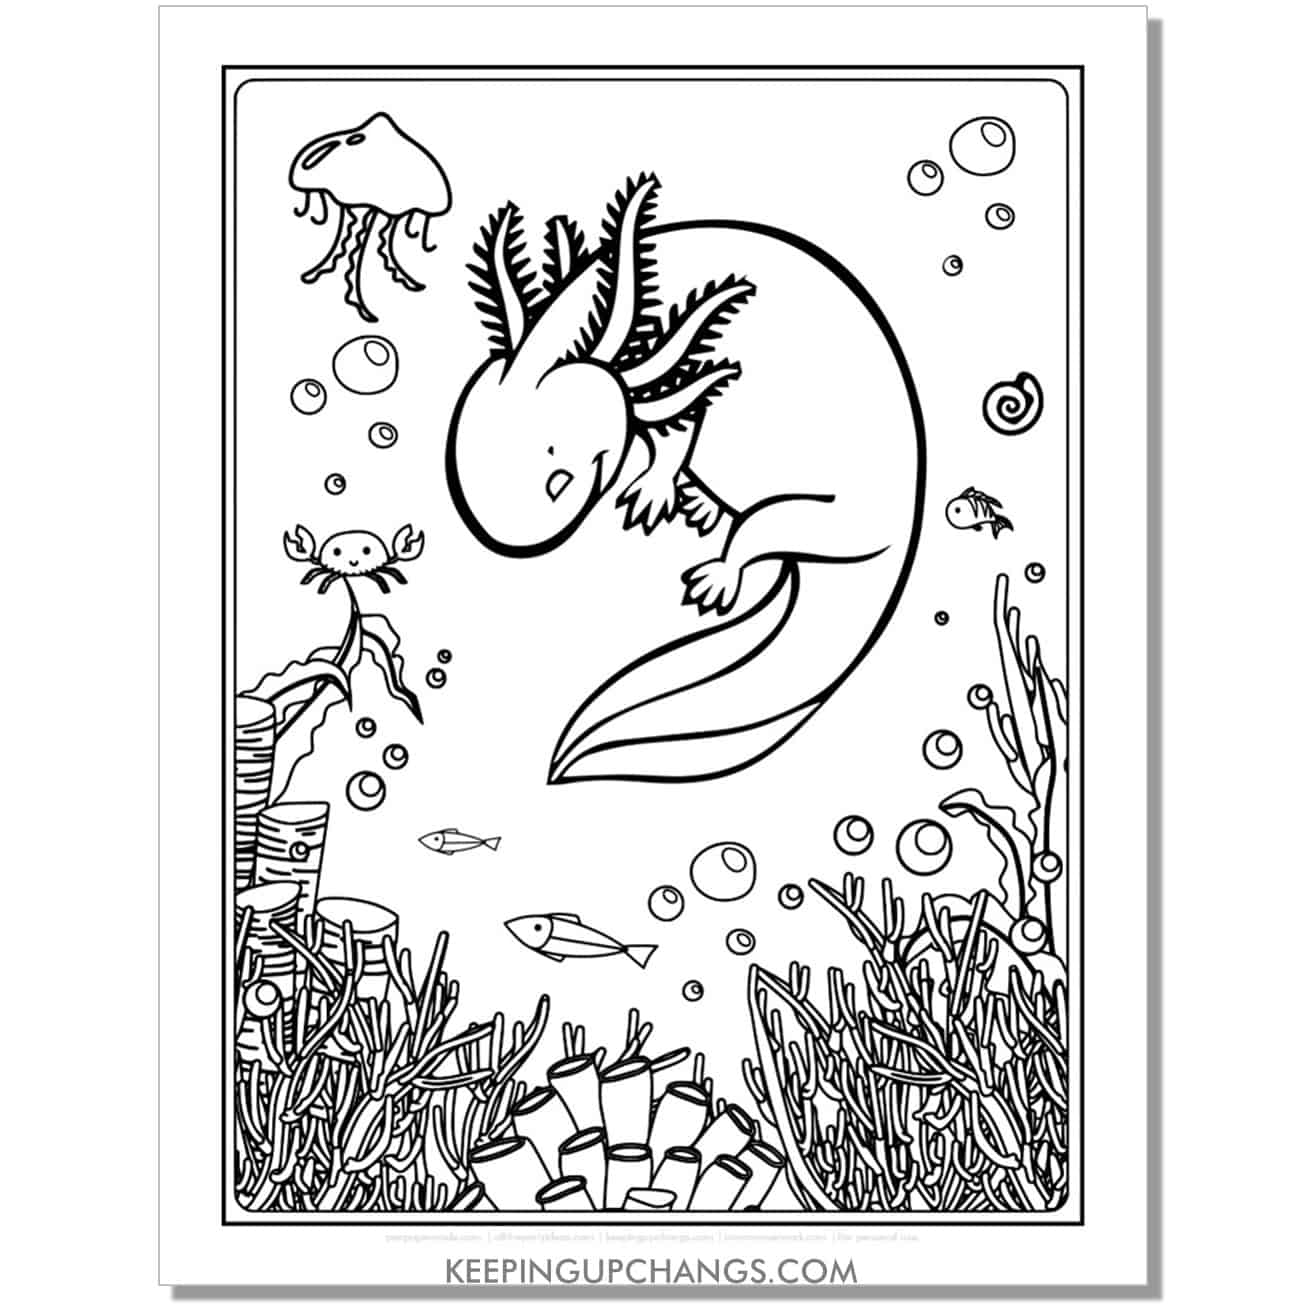 free resting axolotl coloring page with jellyfish, crab, fish, coral.